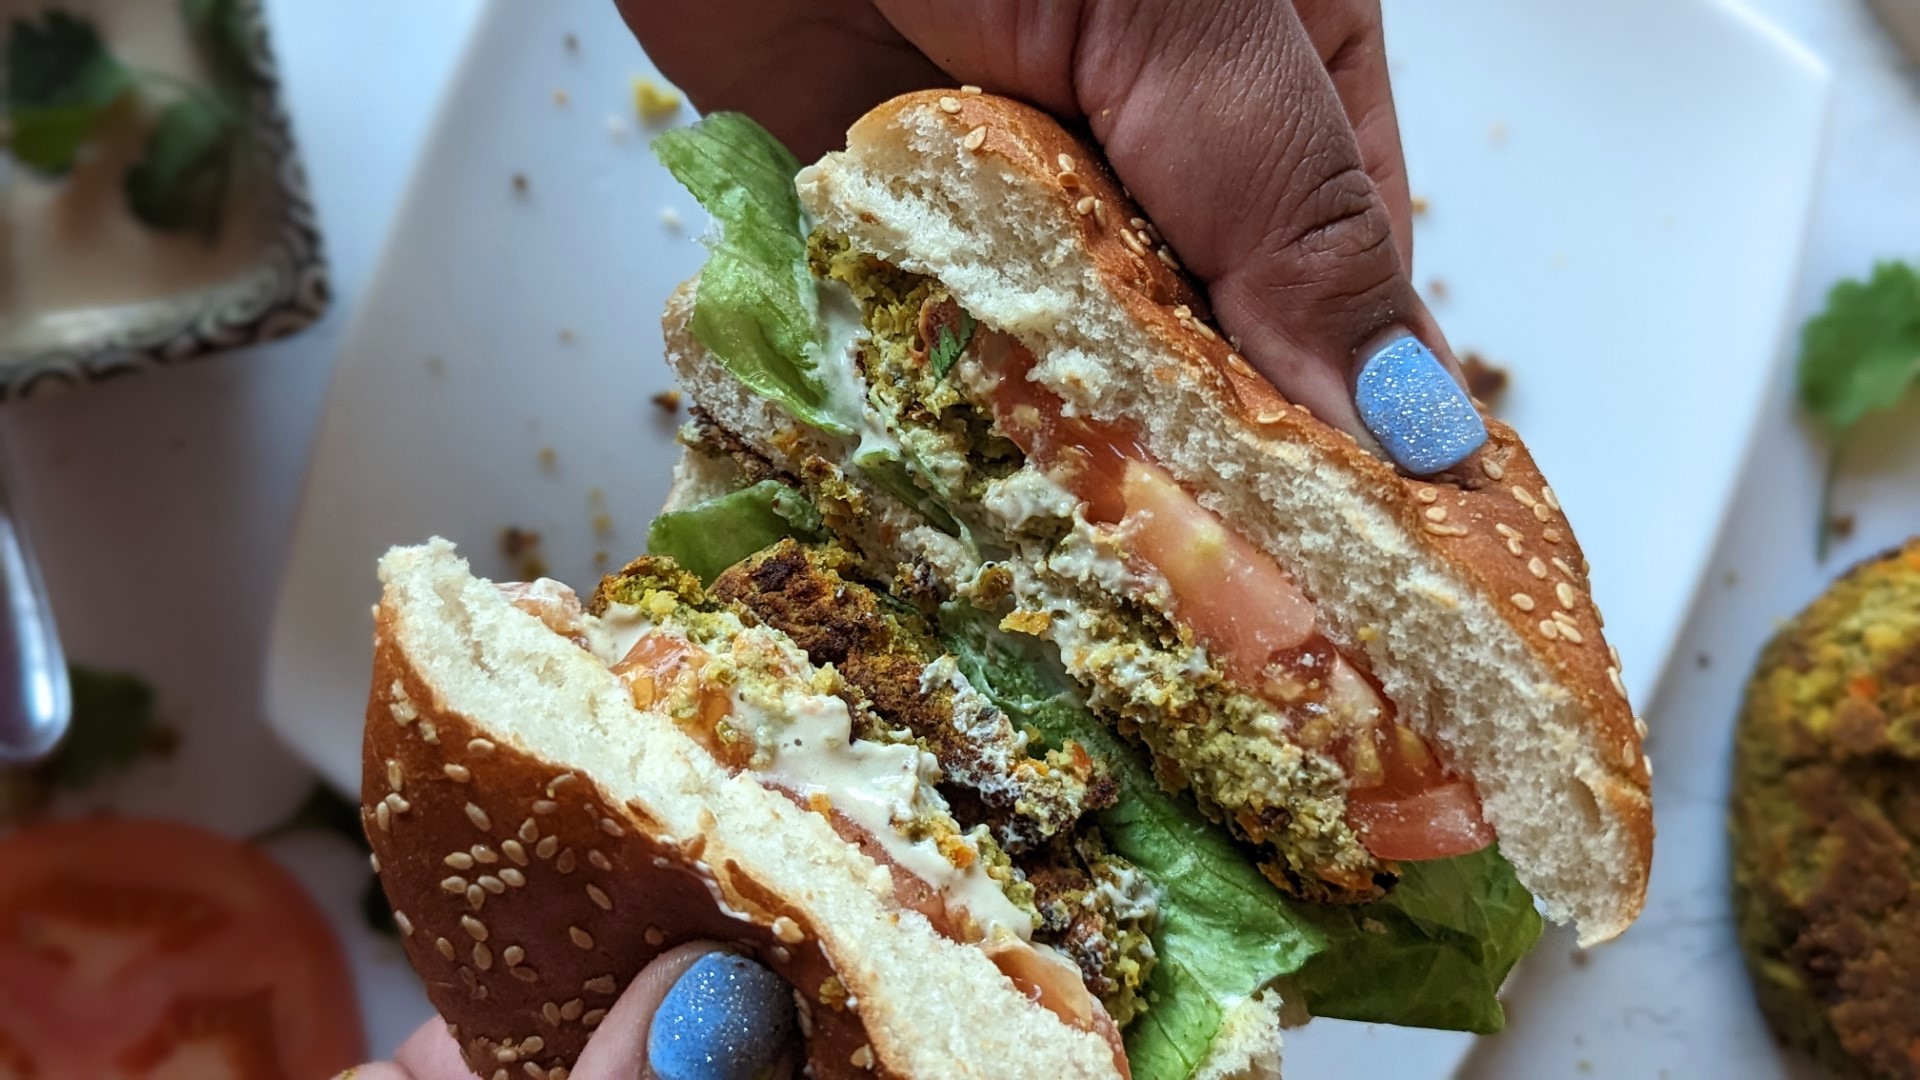 Falafel burger with toppings in hand